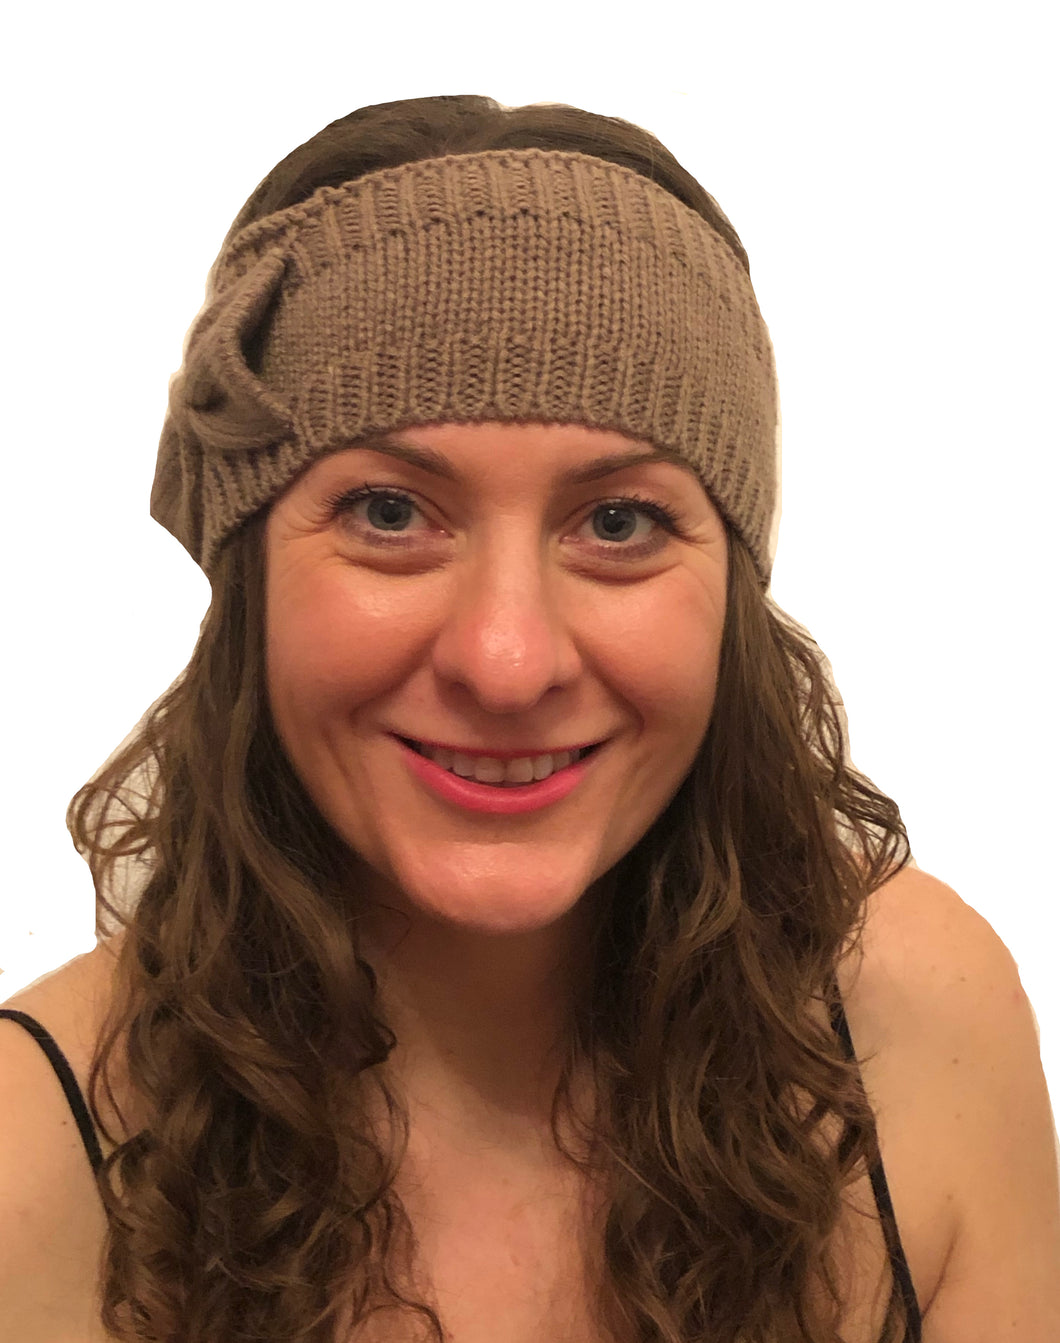 Brown woollen machine knitted headband with bow. Lovely to keep your head warm in the winter.